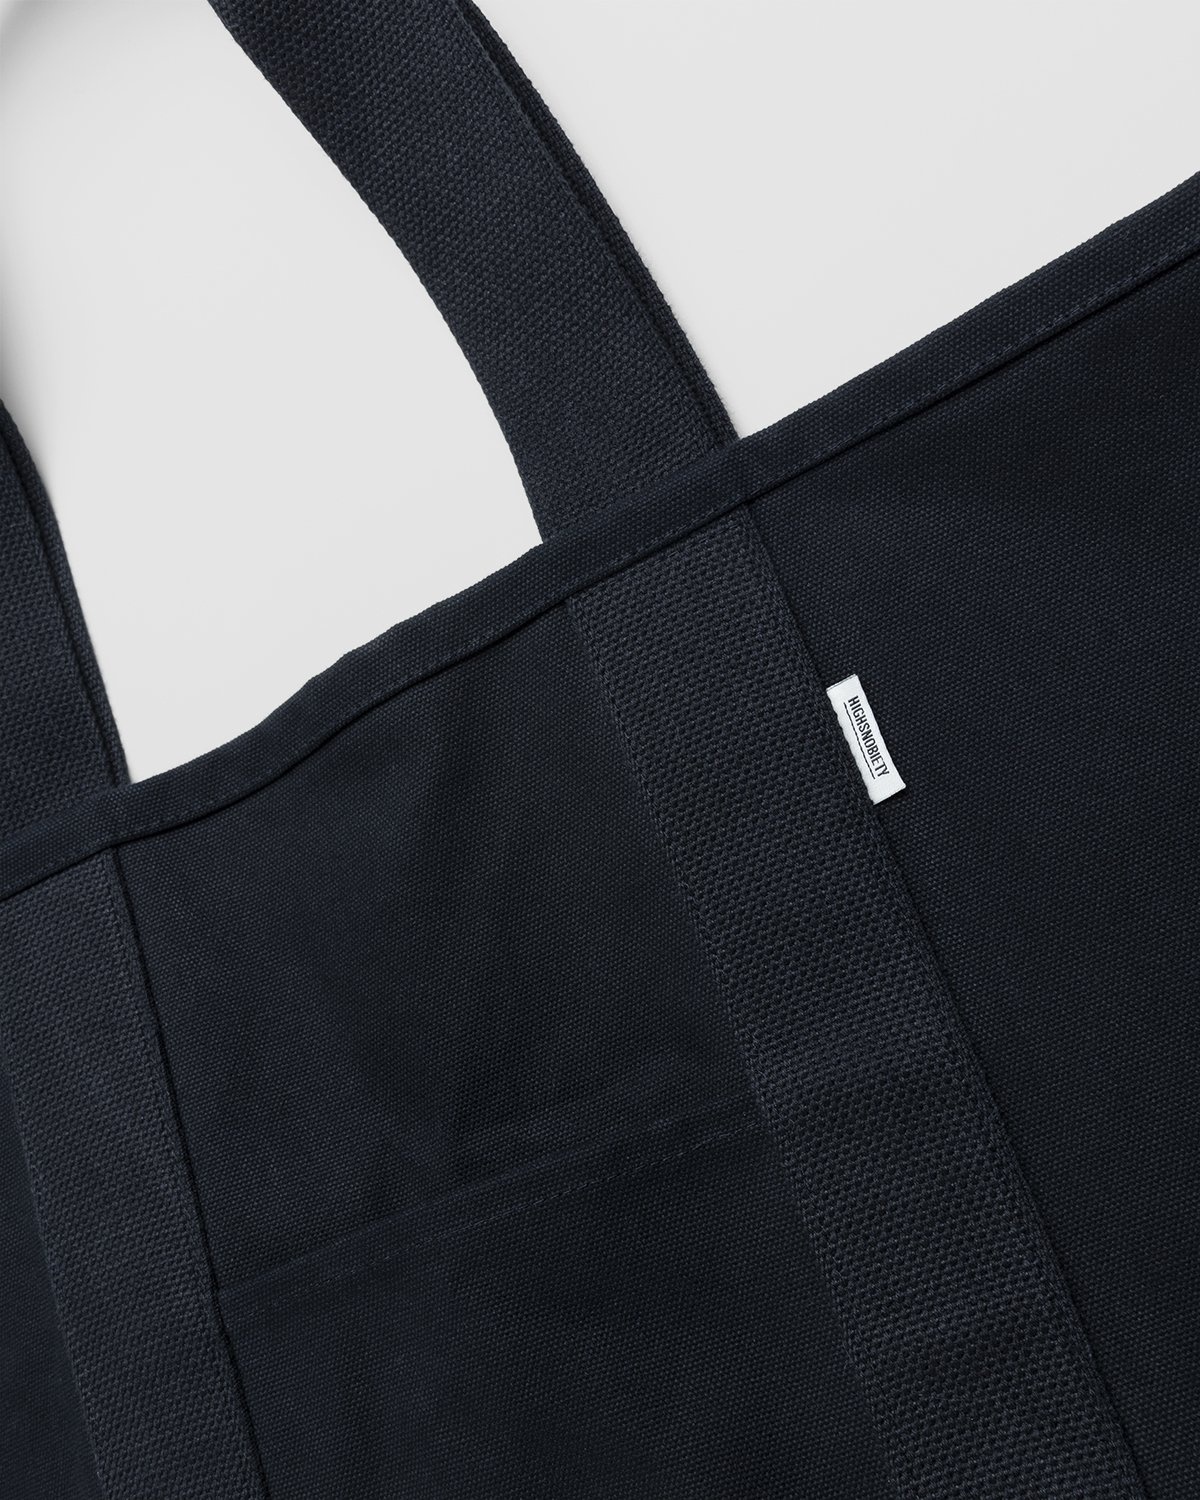 Highsnobiety – Heavy Canvas Large Shopper Tote Black - Tote Bags - Black - Image 4